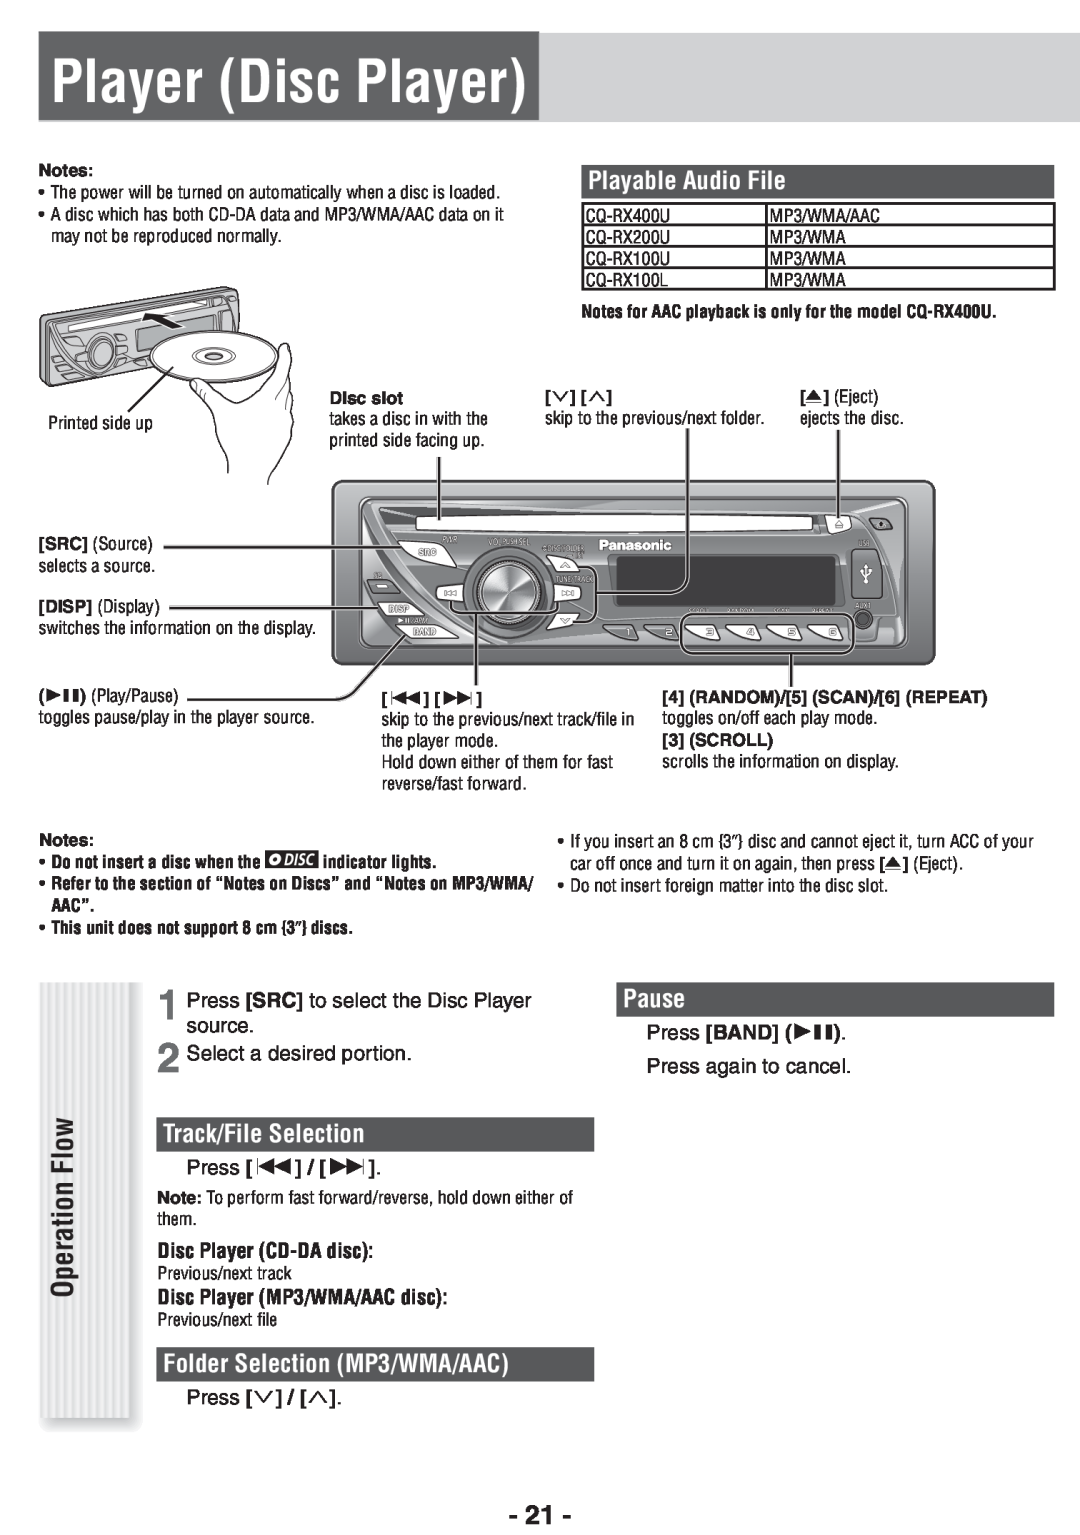 Panasonic CQ-RX100U Player Disc Player, Track/File Selection, Folder Selection MP3/WMA/AAC, Pause, Operation Flow, Eject 